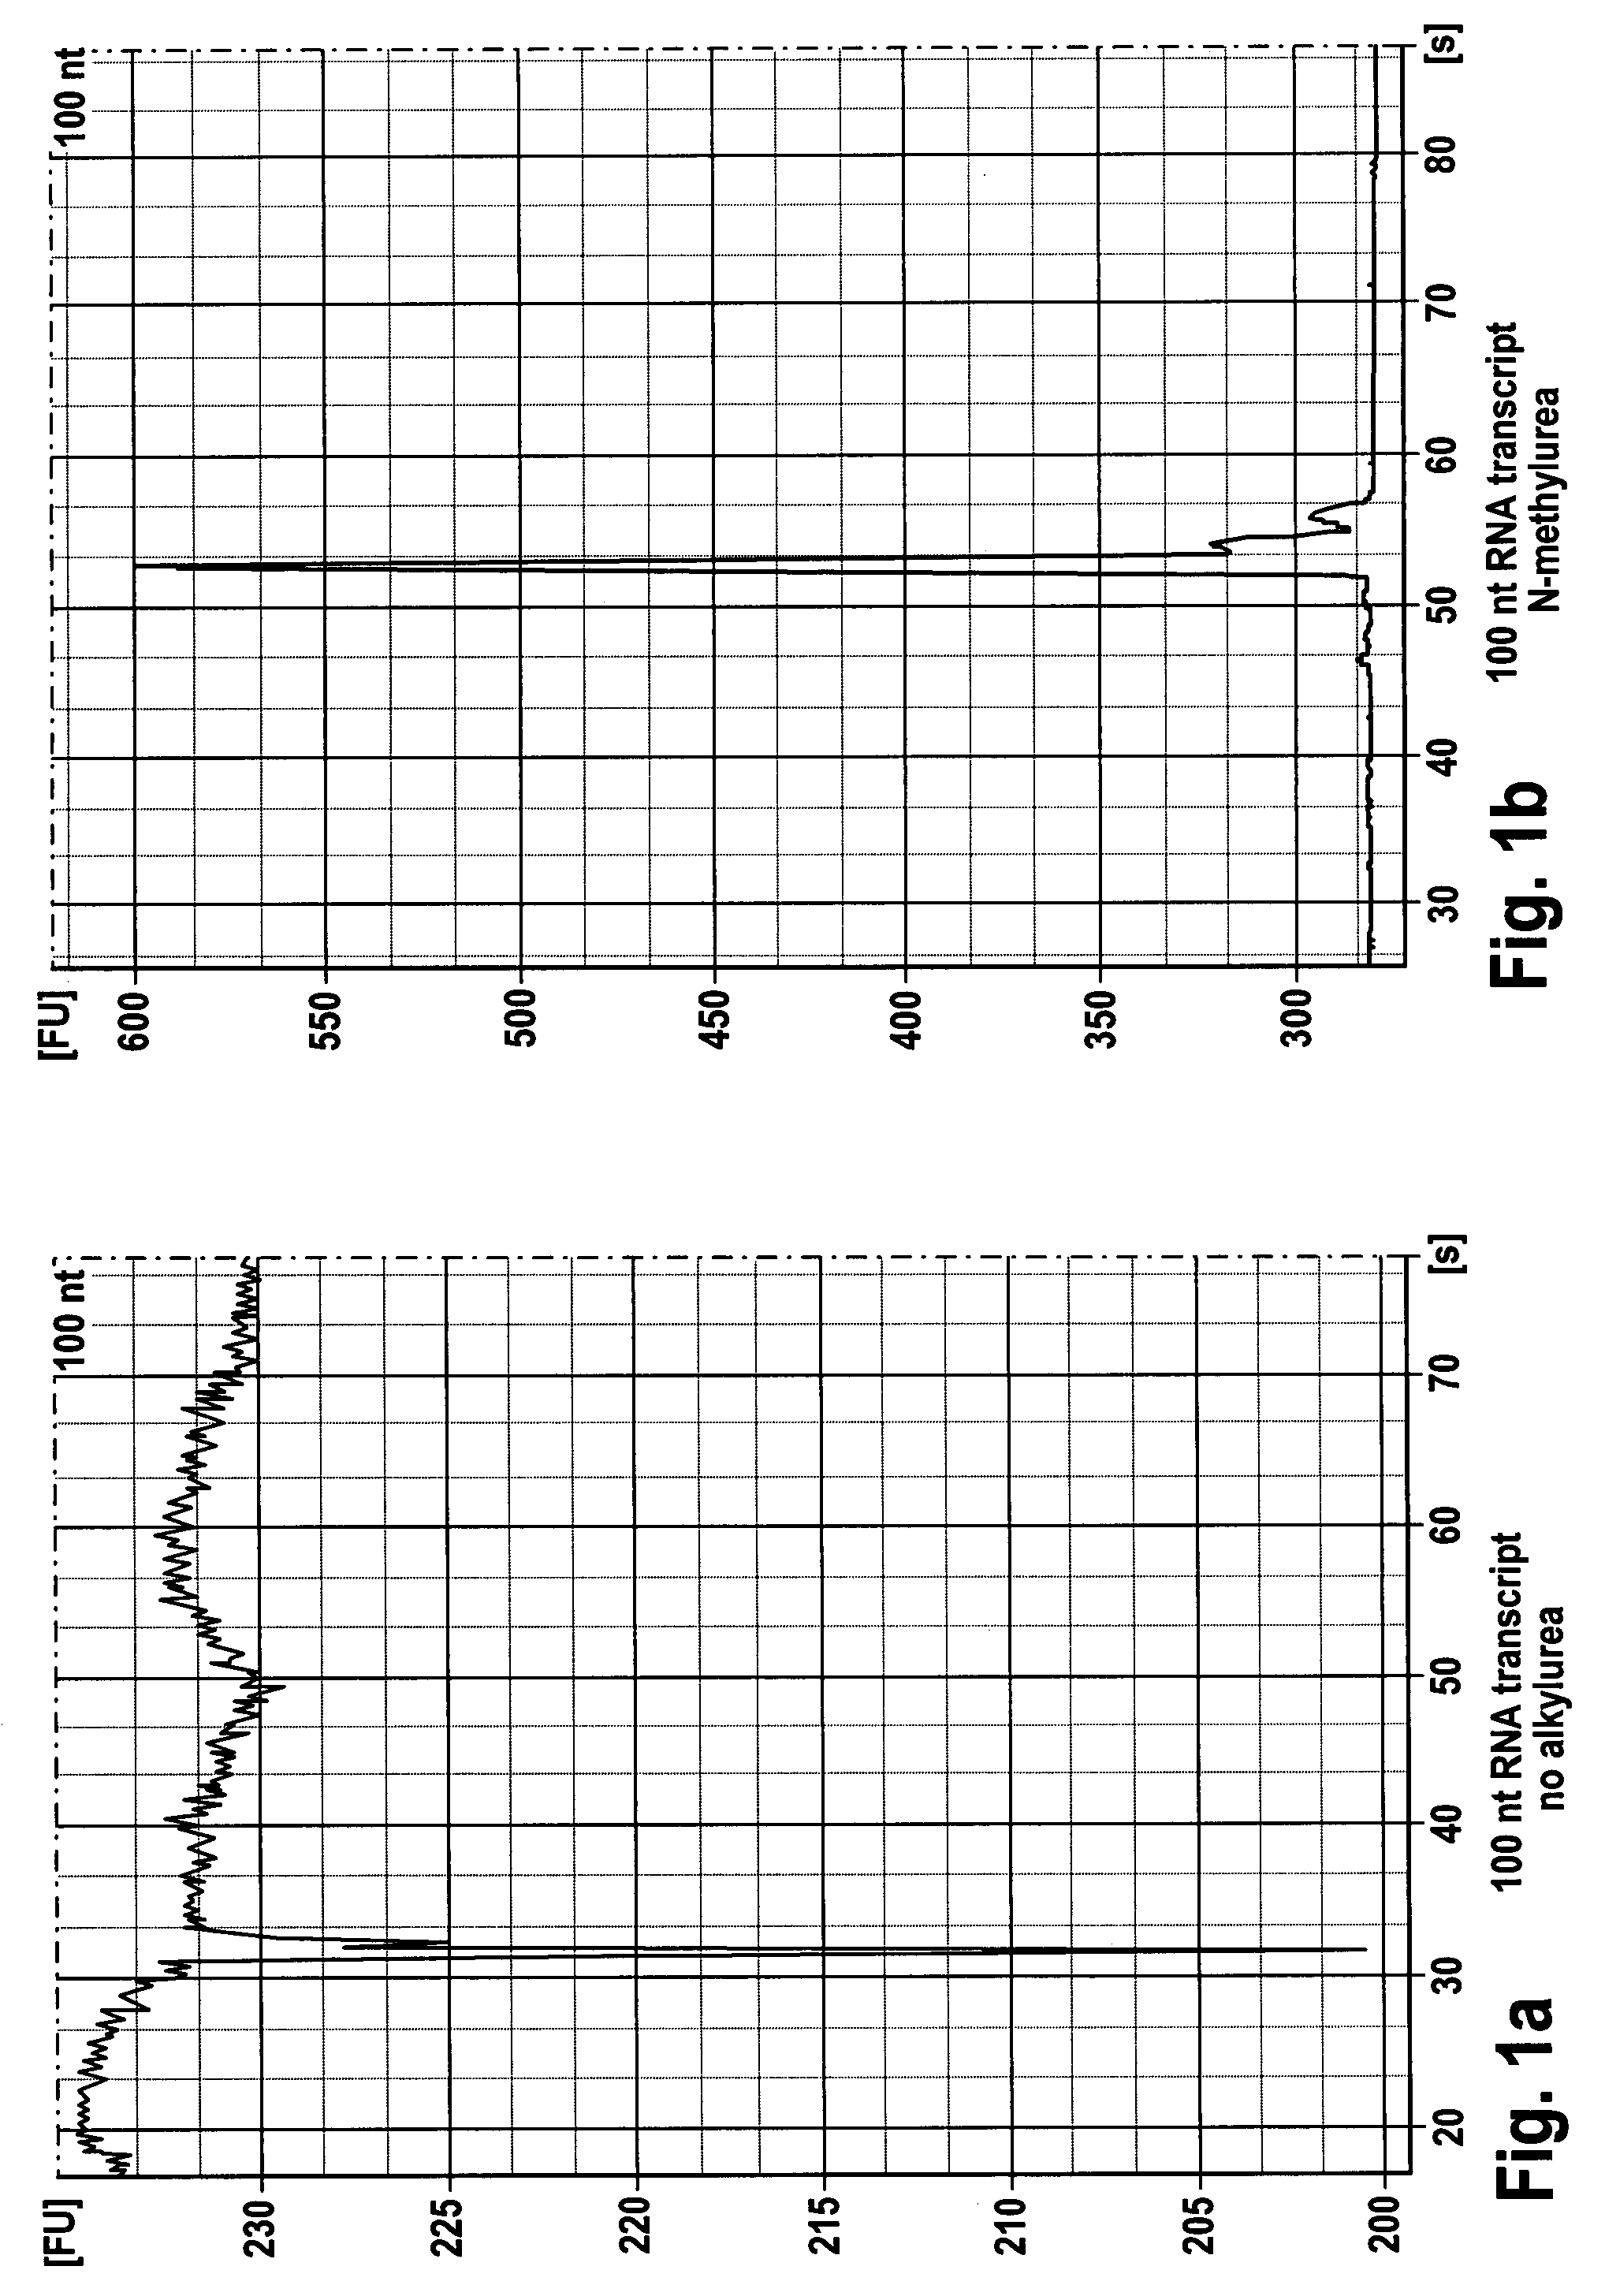 Medium for enhanced staining of single strand nucleic acids in electrophoresis